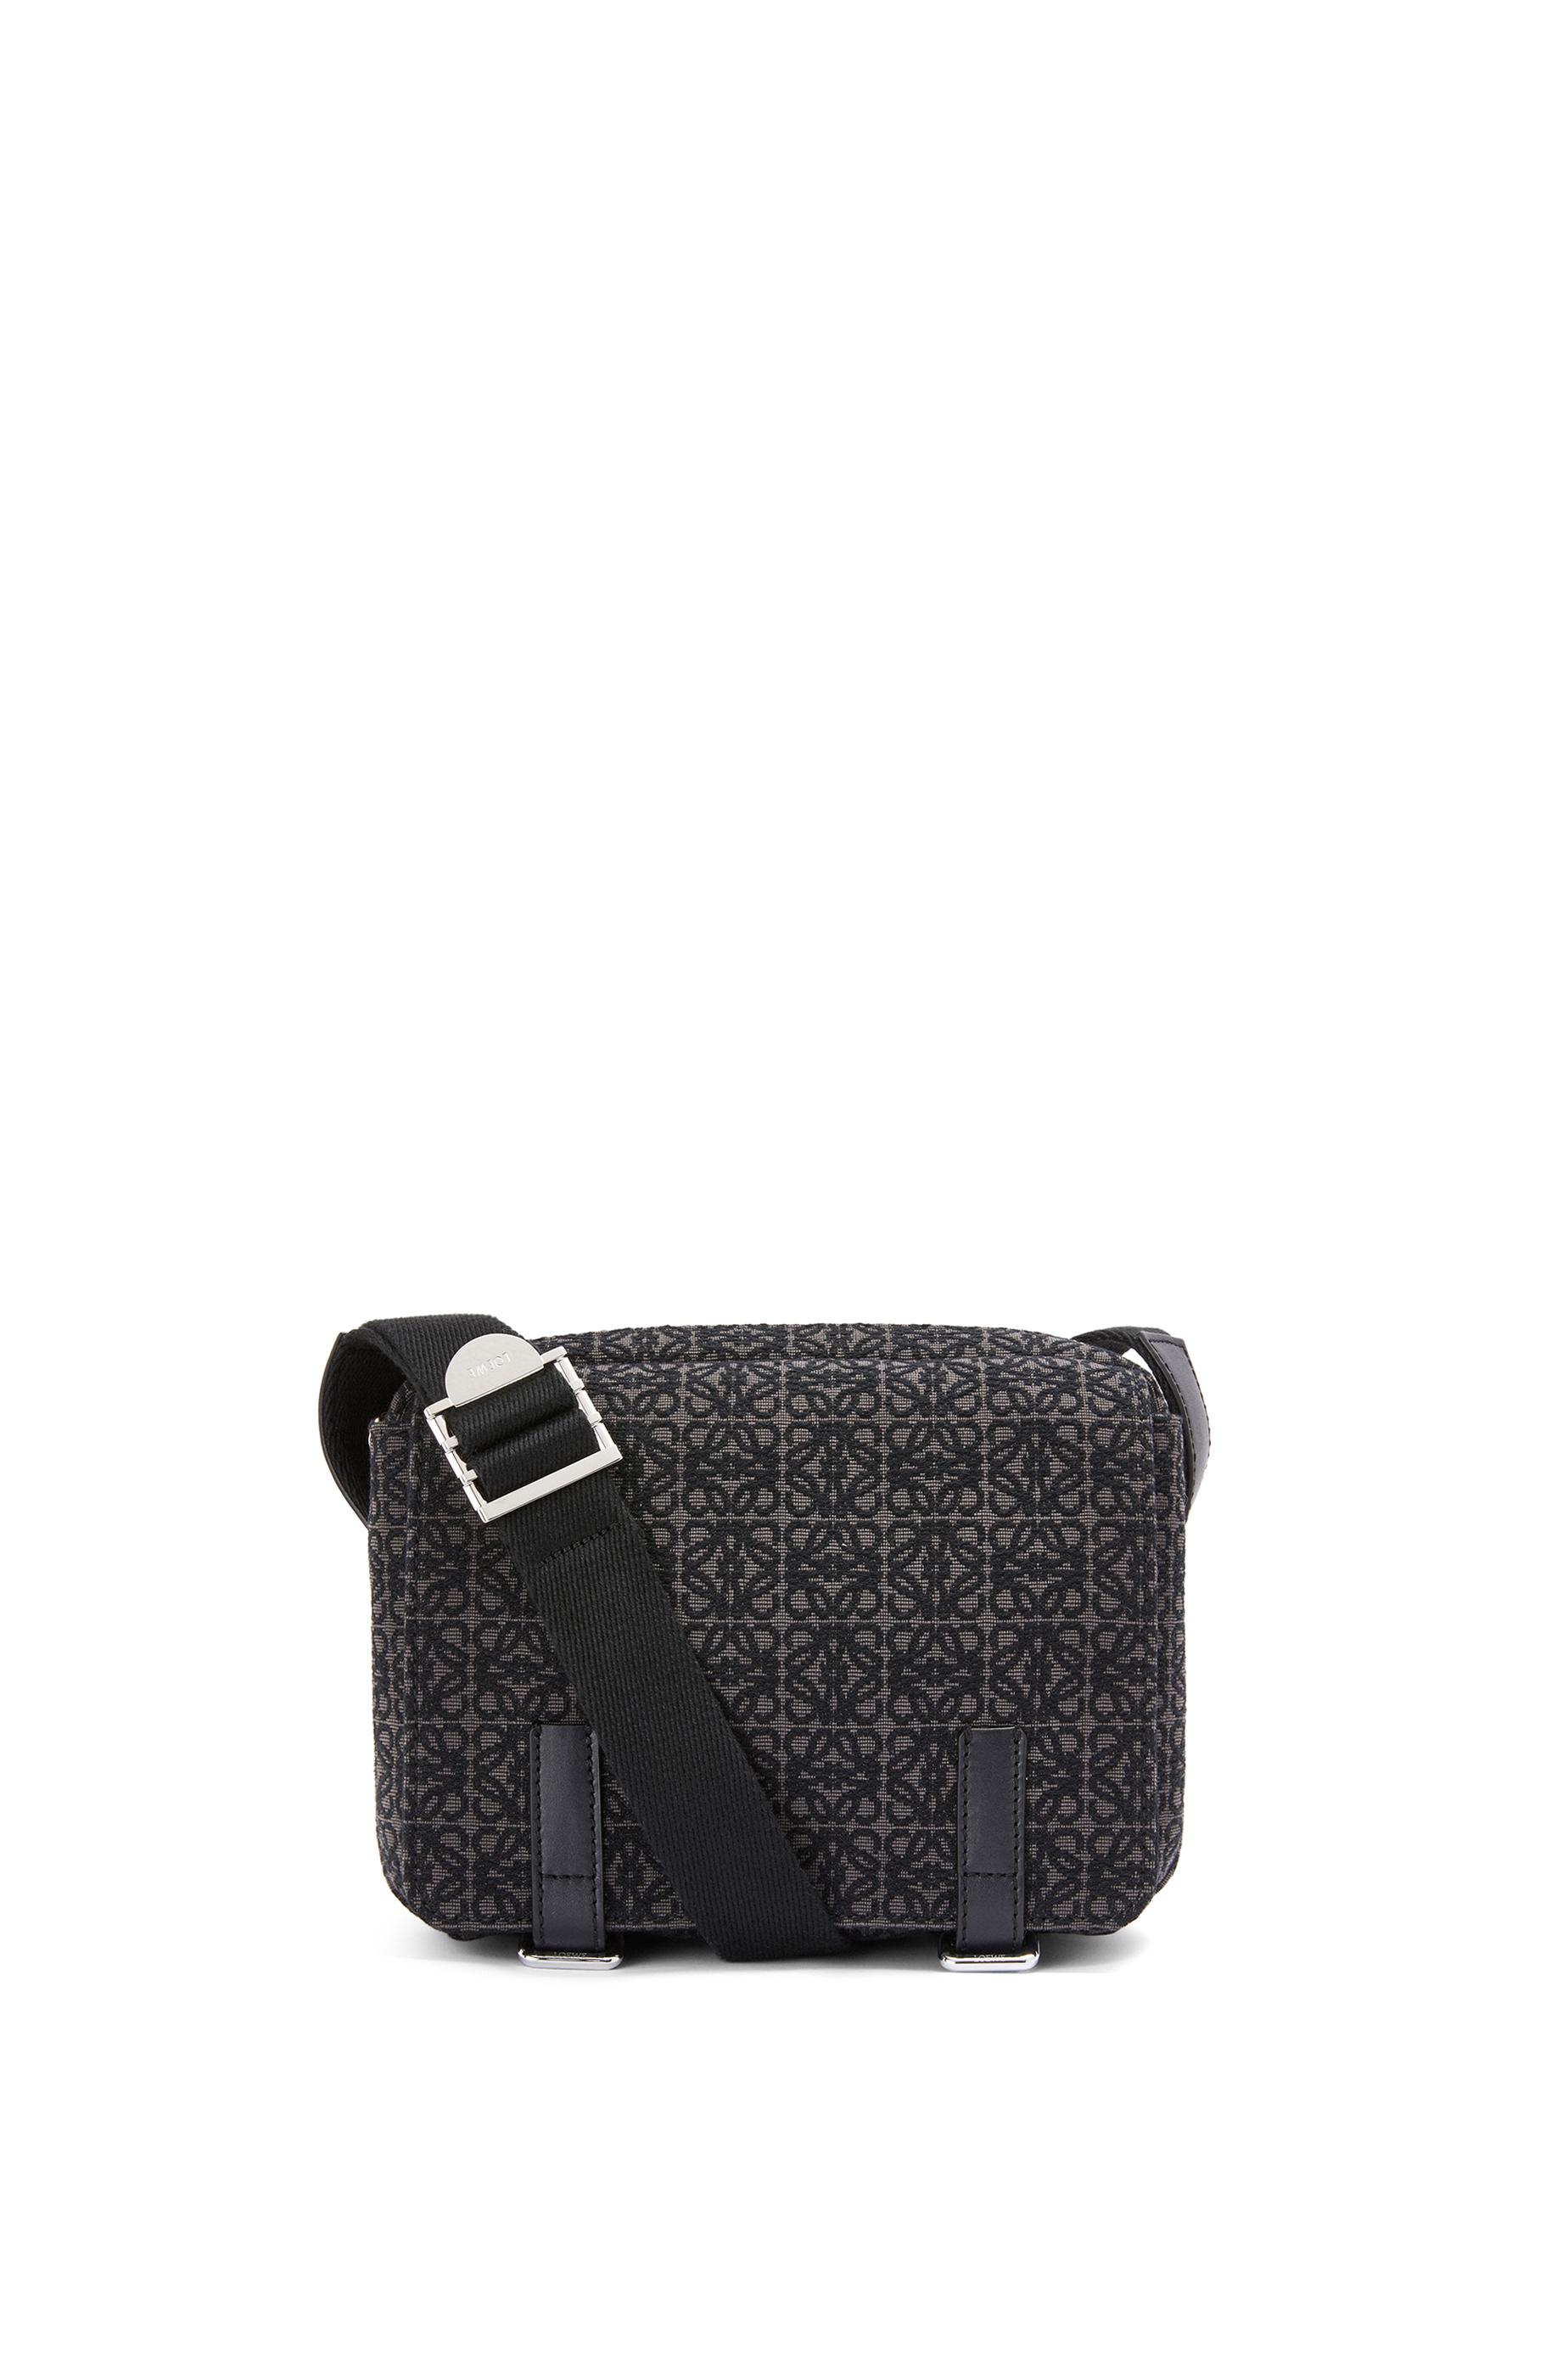 XS Military messenger bag in Anagram jacquard and calfskin by LOEWE